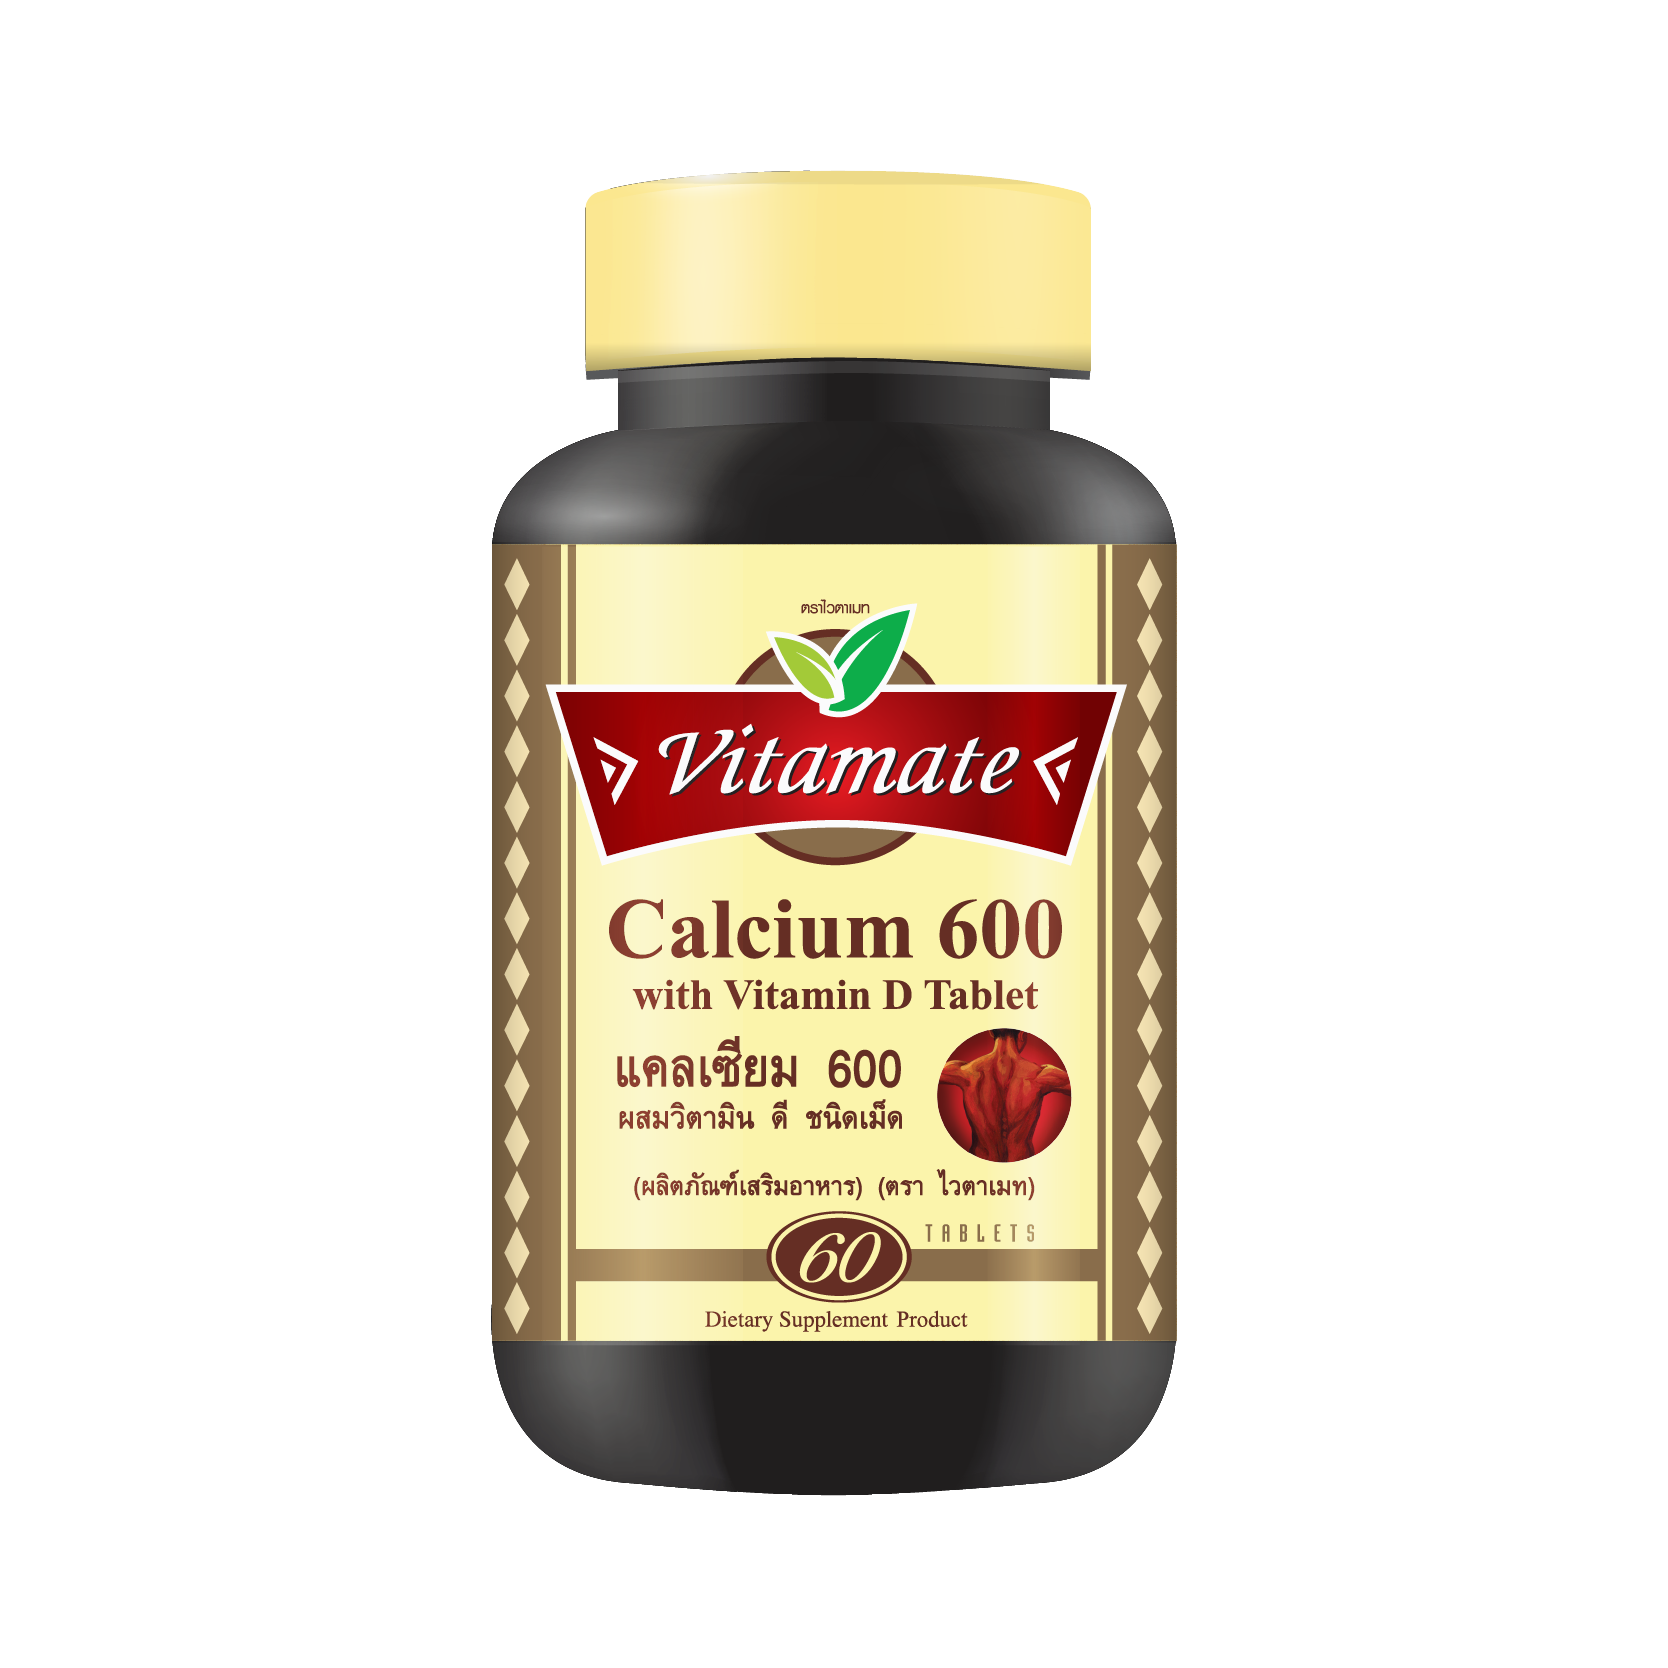 Vitamate Calcium600 with Vitamin D Tablet 60 Tablets